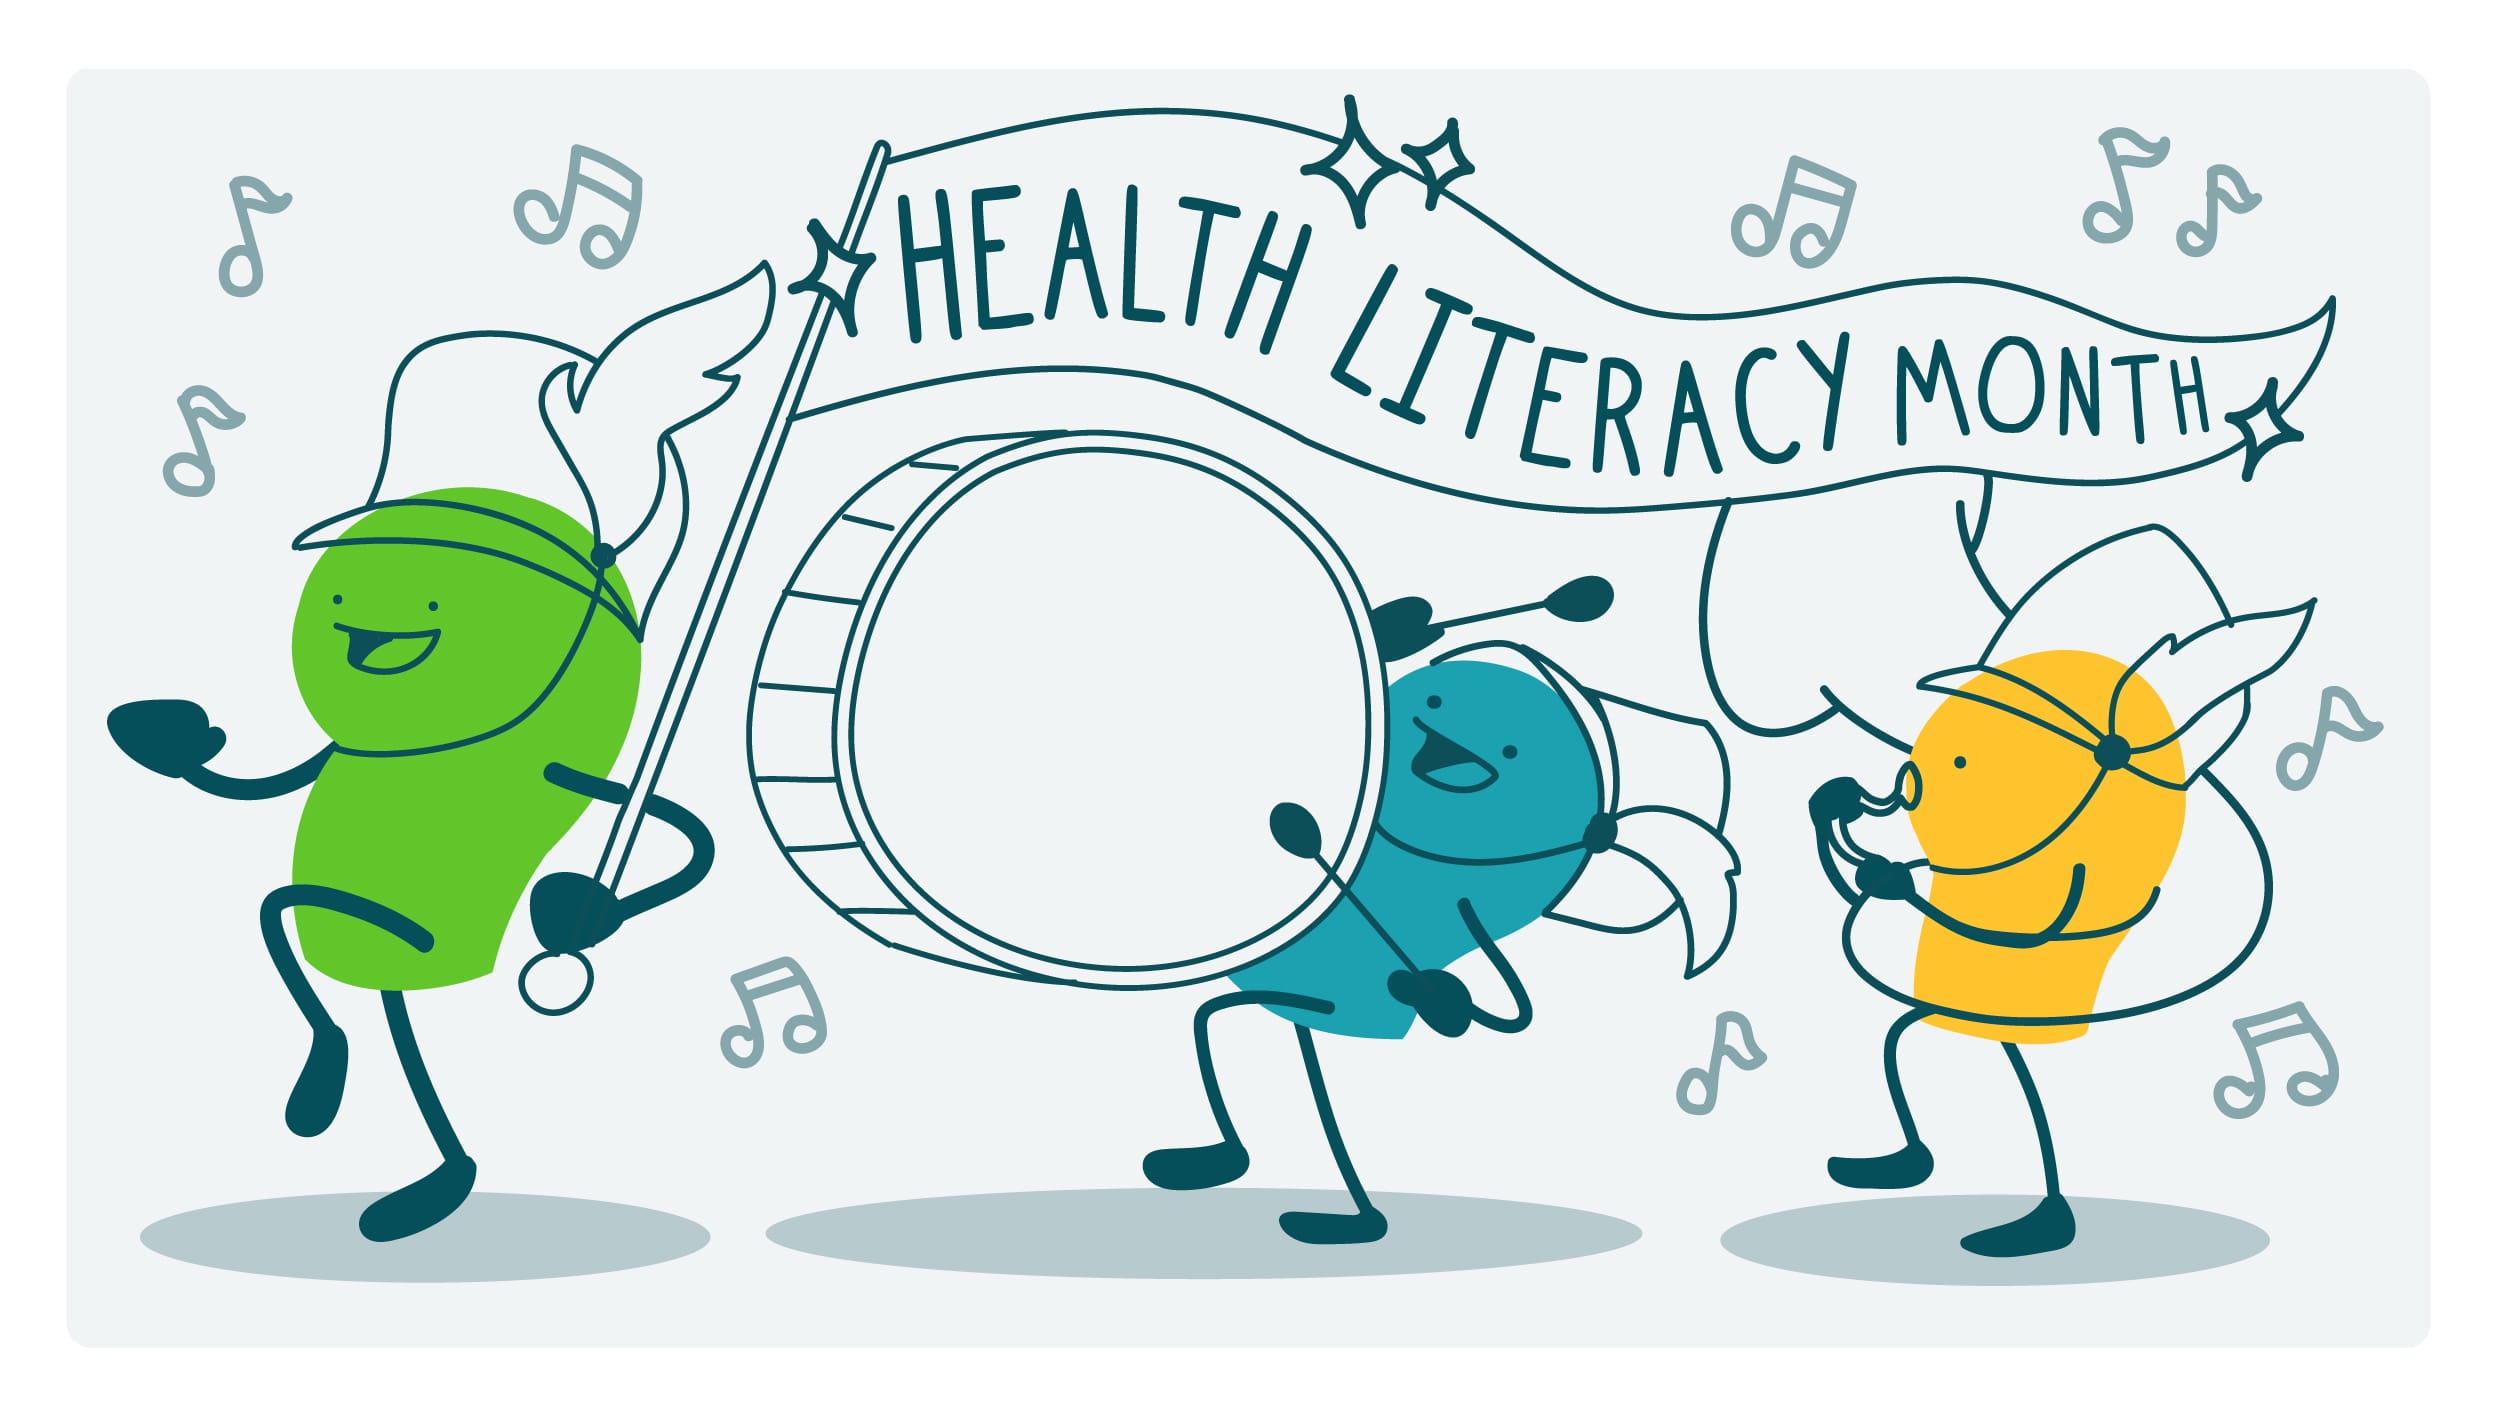 Marching band of doodles holding a banner that says "Health Literacy Month"